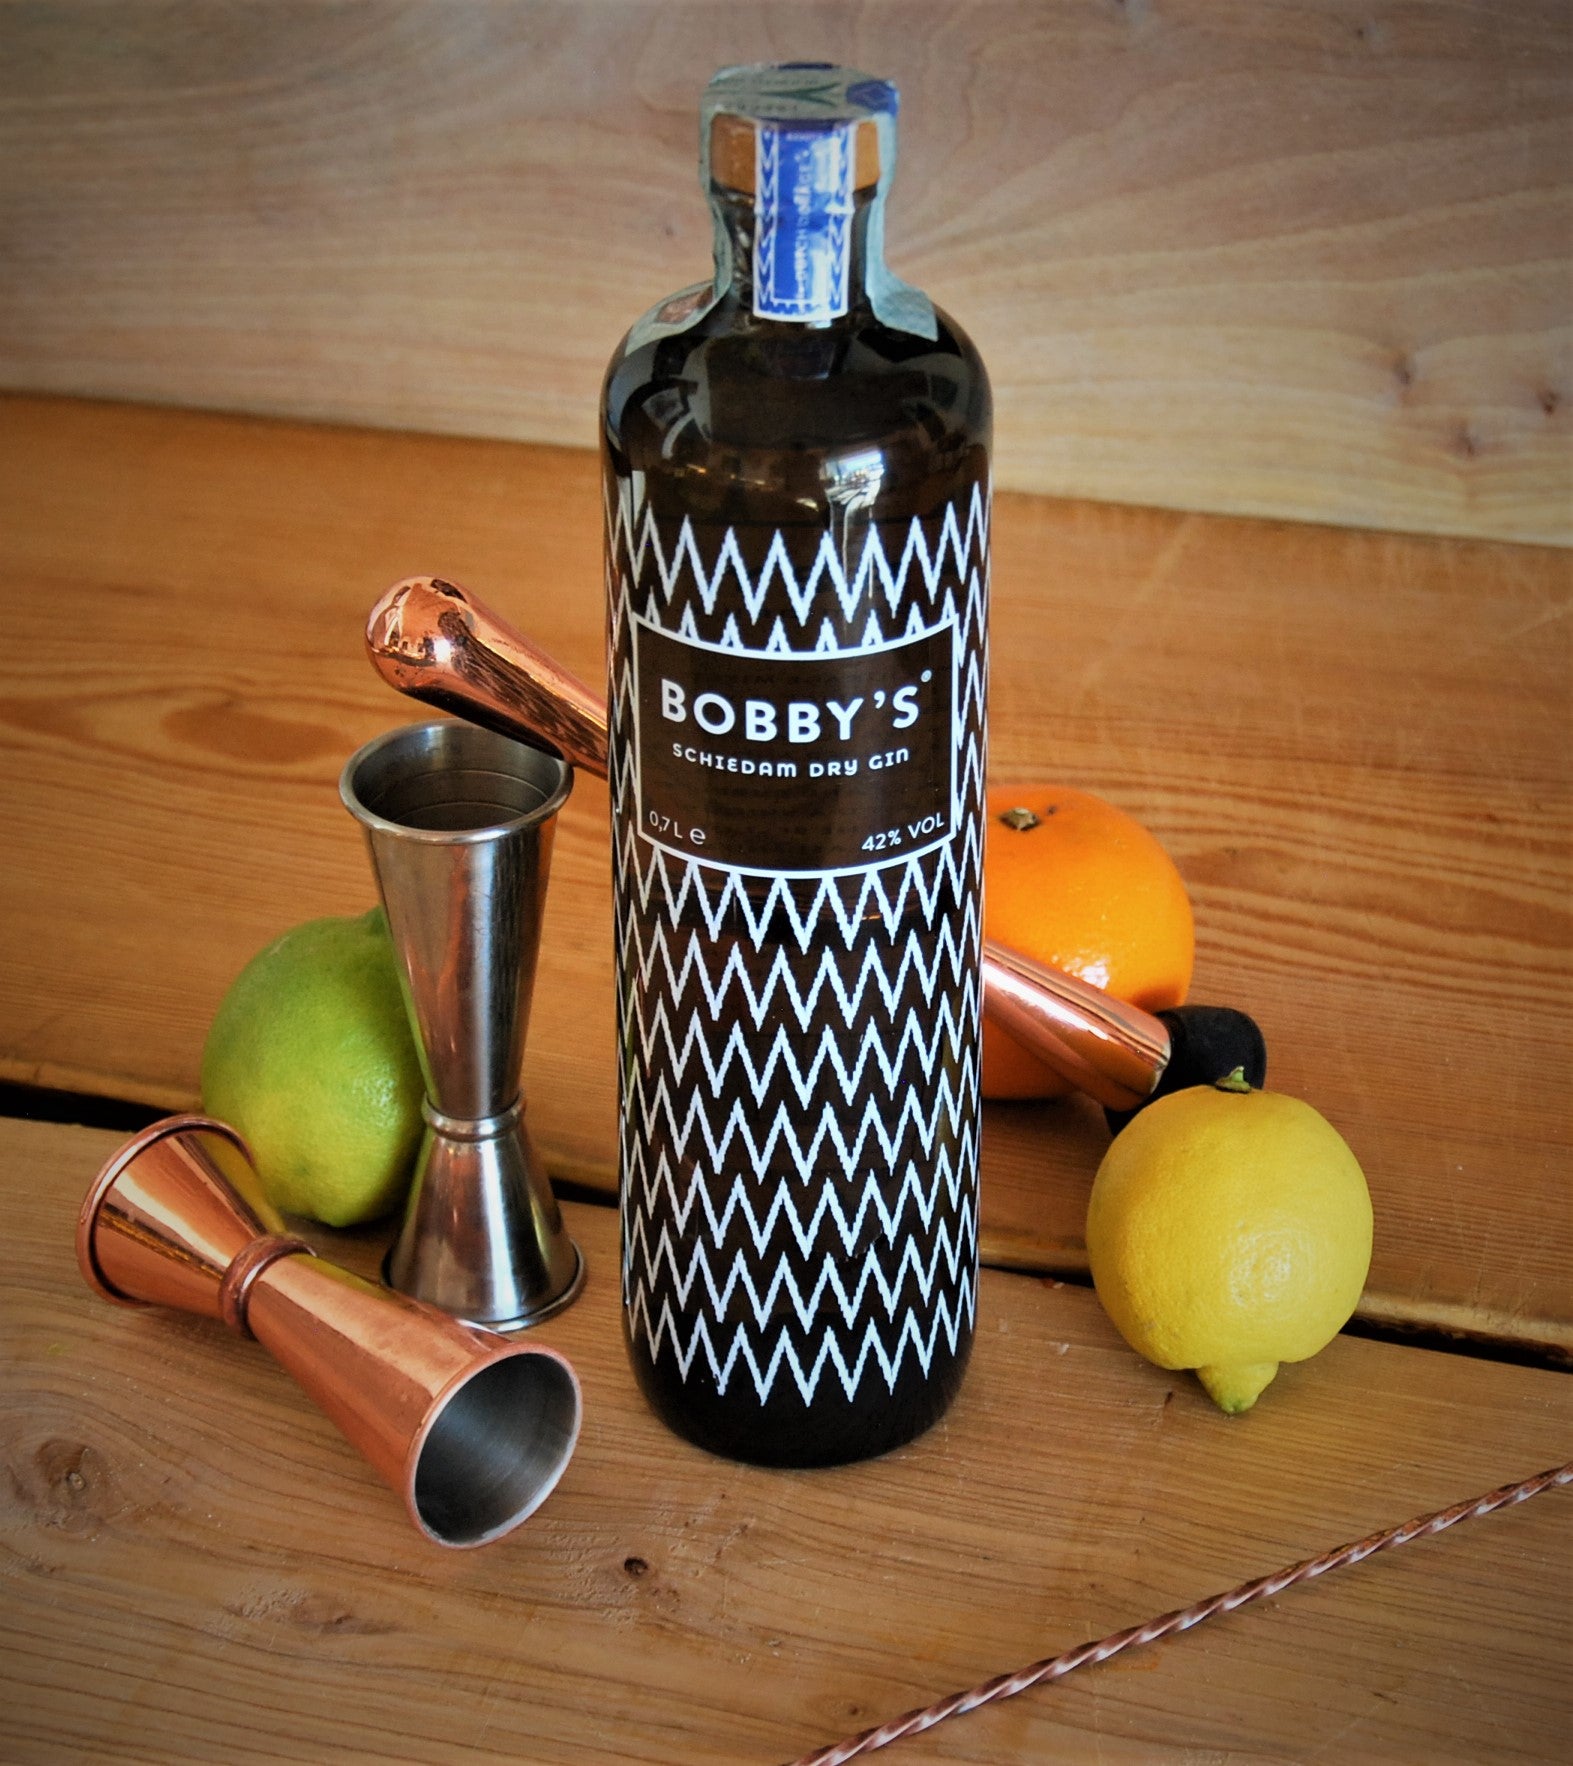 BOBBY'S DRY GIN 70cl – Formaggidieros